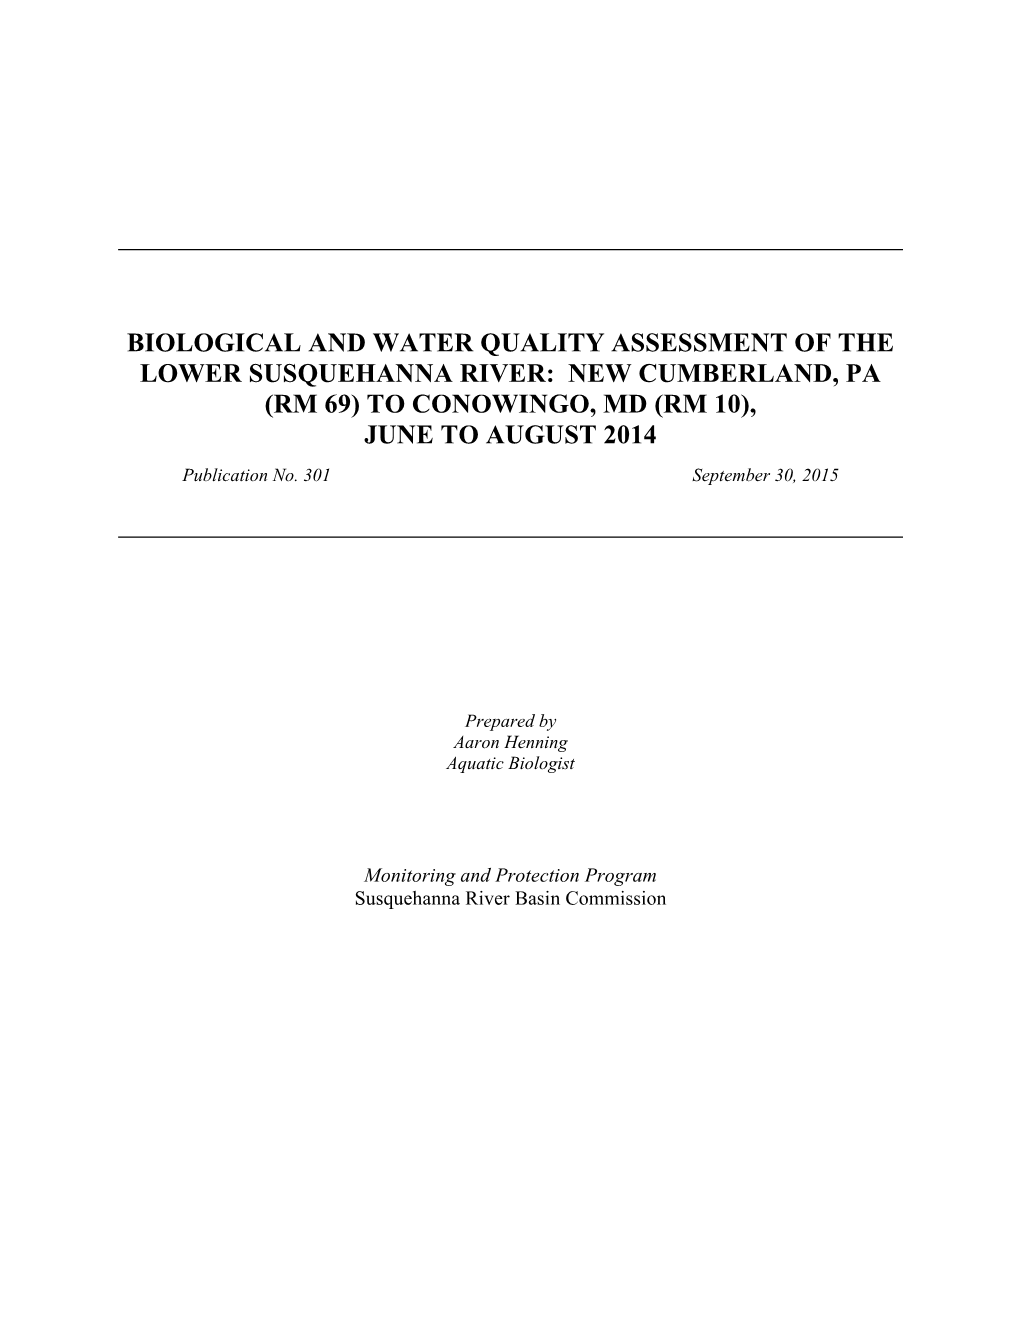 Biological and Water Quality Assessment of the Lower Susquehanna River: New Cumberland, Pa (Rm 69) to Conowingo, Md (Rm 10), June to August 2014